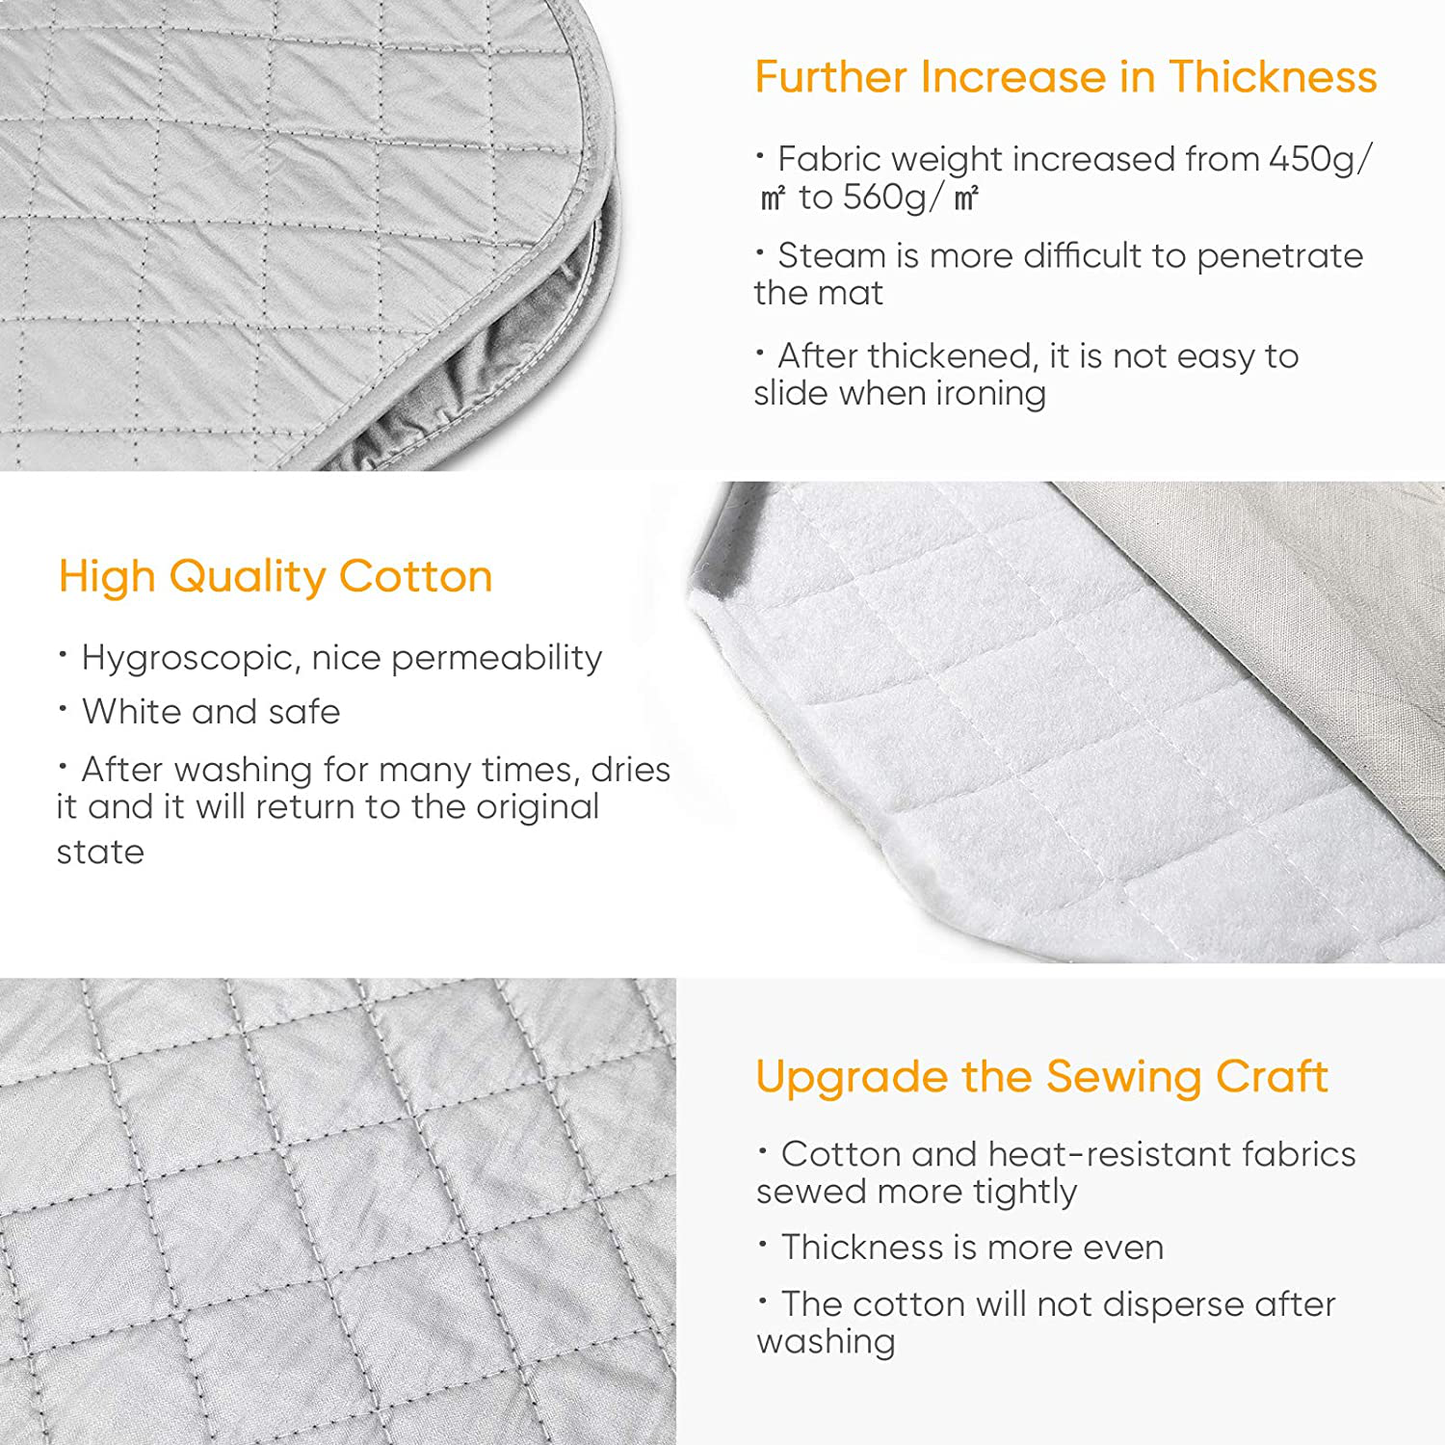  Ironing Blanket,Second Generation Upgraded Thick Portable  Travel Isolate Heat Pad Cover for Washer,Dryer,Table Top,Countertop,Ironing  Board for Small Space-19 x 33 inch : Home & Kitchen